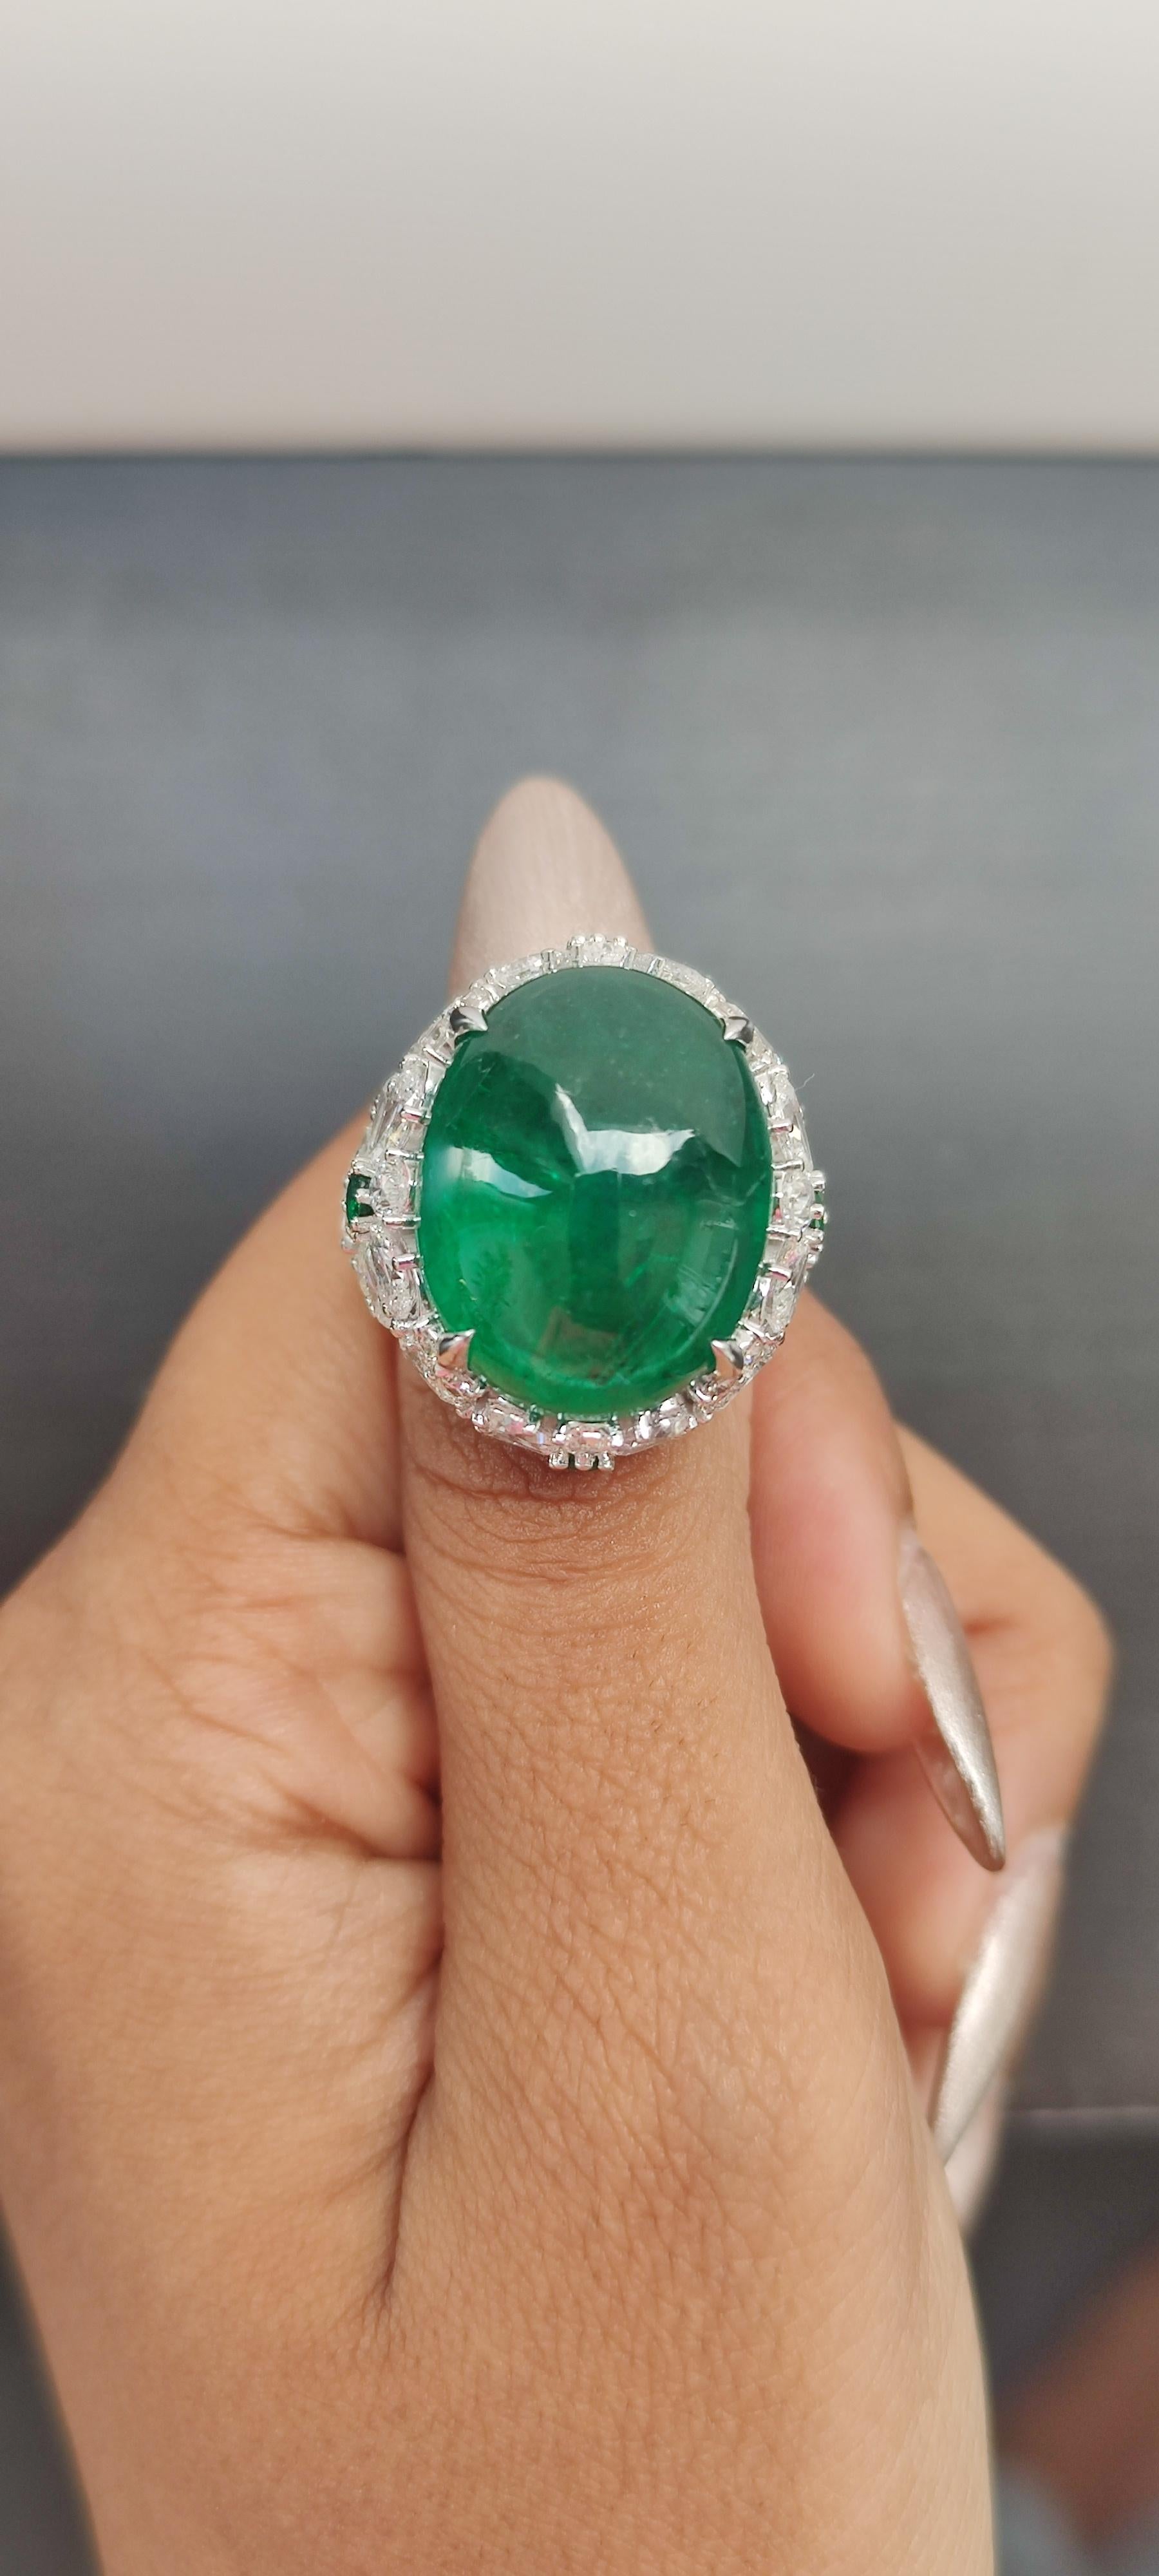 24.60 Carat Cabochon Emerald Art Deco Inspired One-of-a-kind Statement Ring For Sale 8